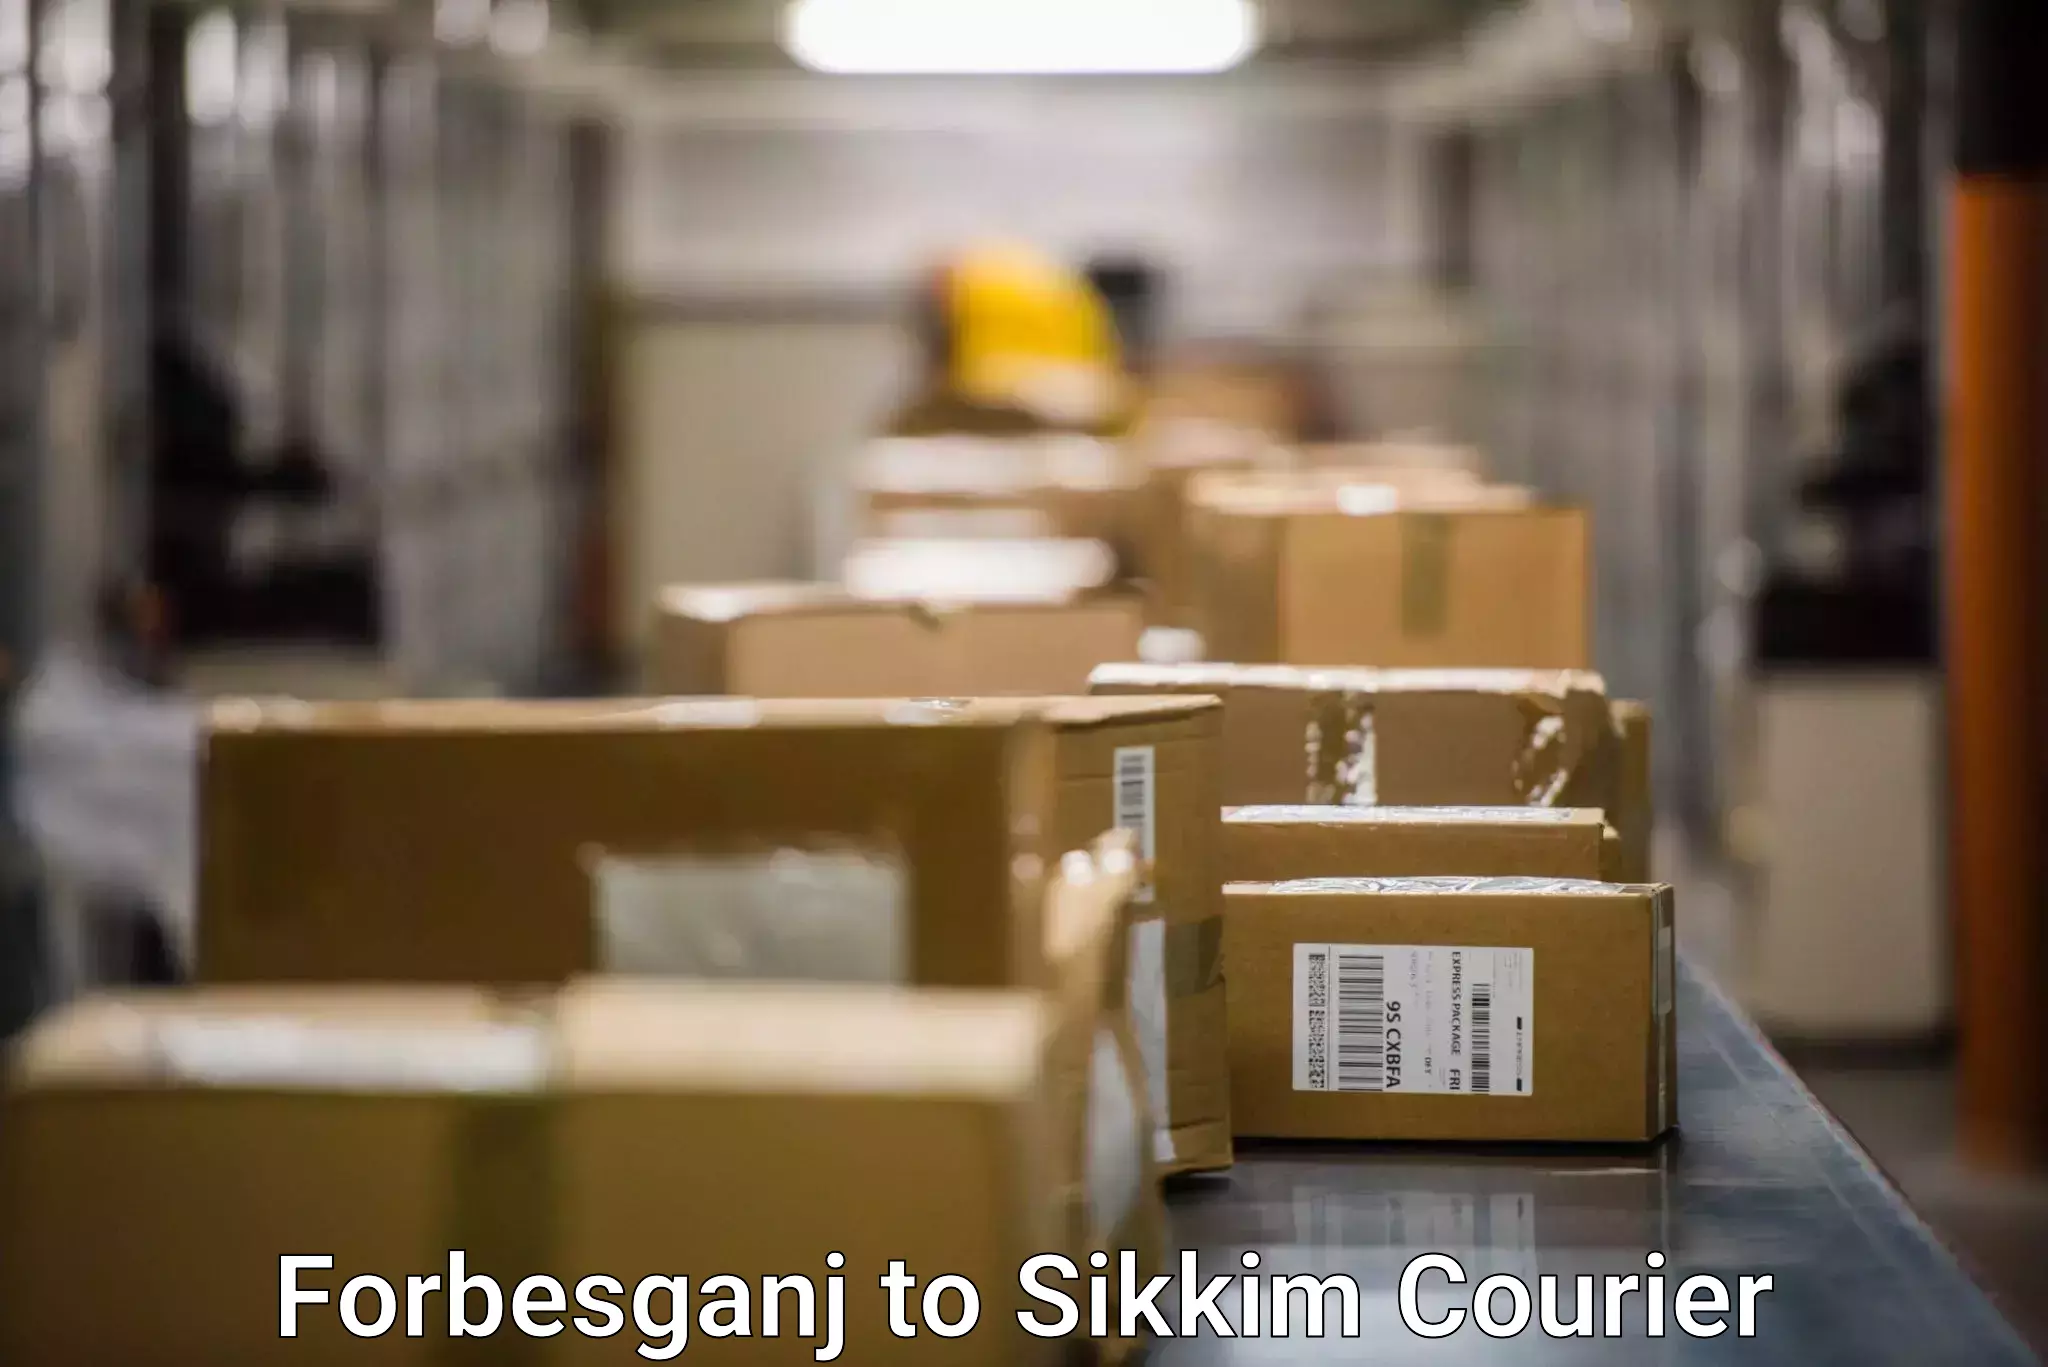 Reliable delivery network Forbesganj to Sikkim